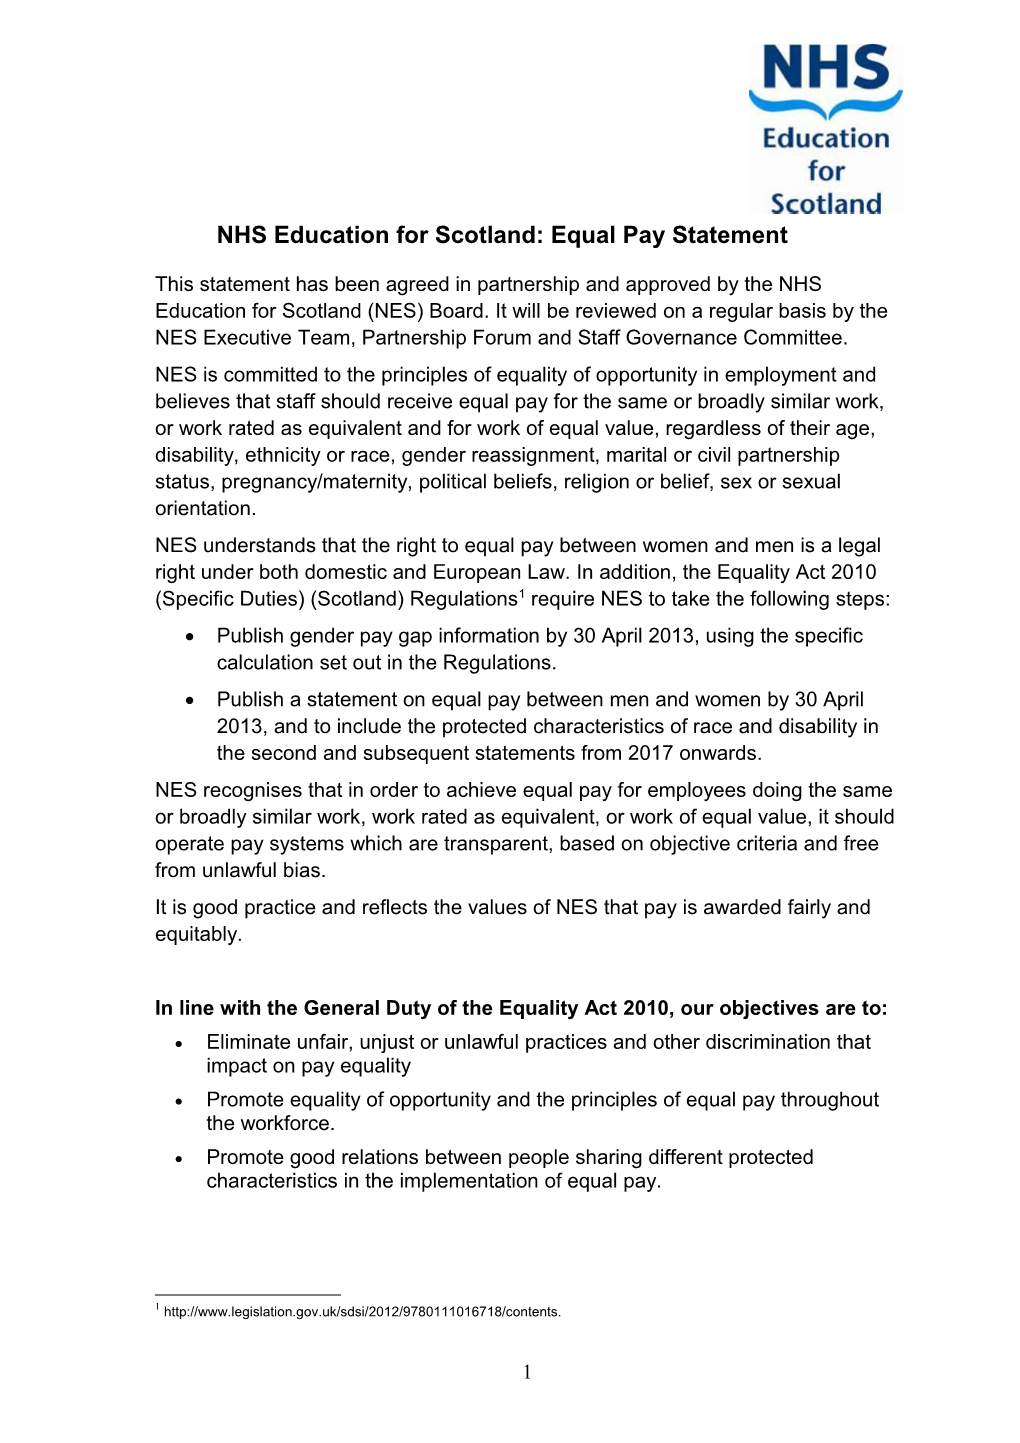 NHS Education for Scotland: Equal Pay Statement